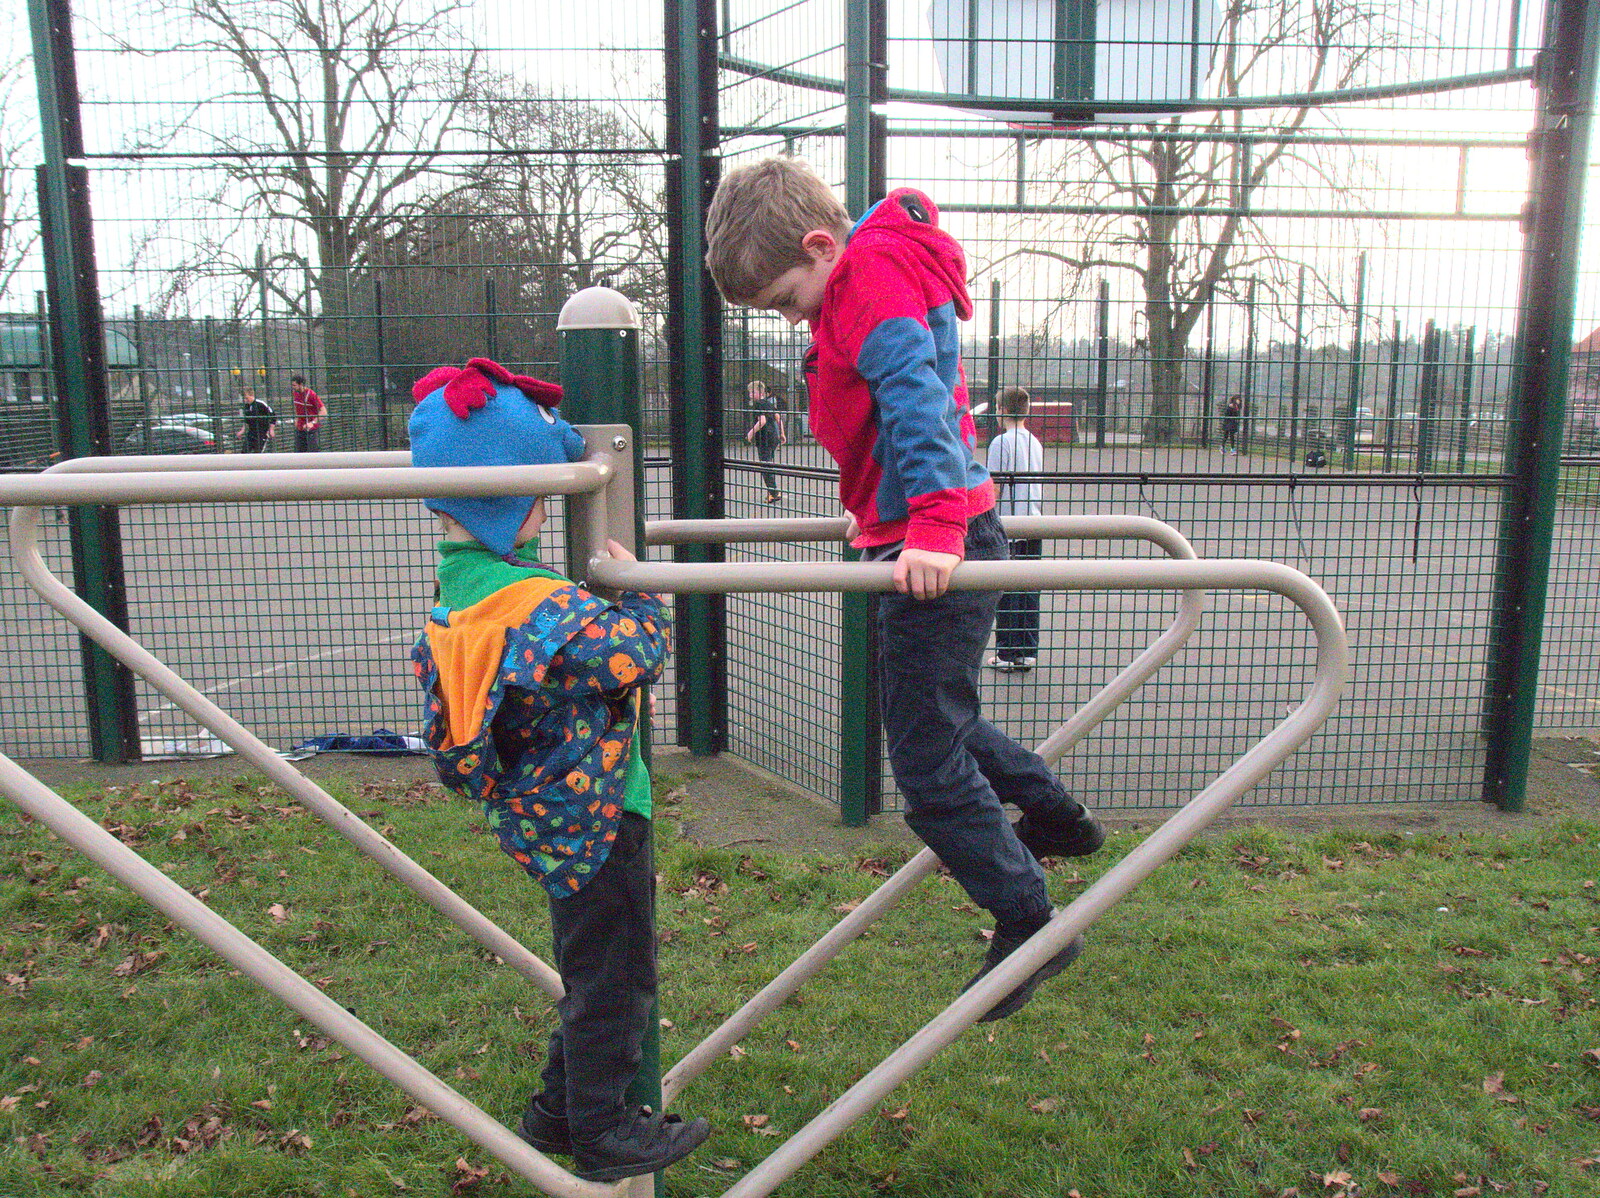 The boys on the parallel bars from Little Venice and Diss Park, West London and Norfolk - 17th February 2017